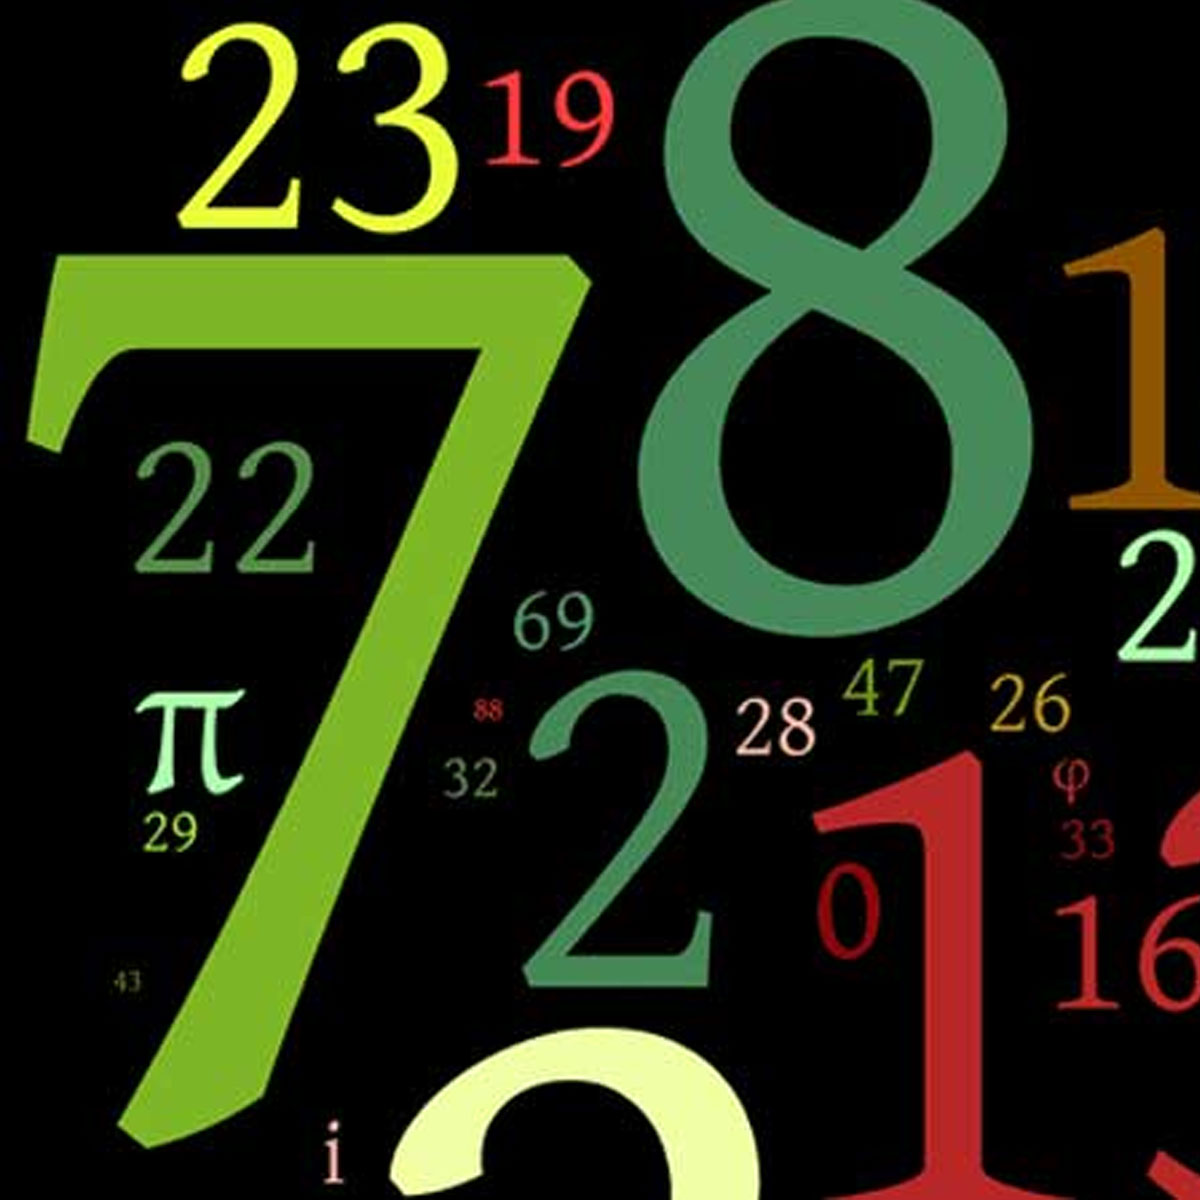 knowing-our-numbers-part-2-indian-international-number-system-learn-science-through